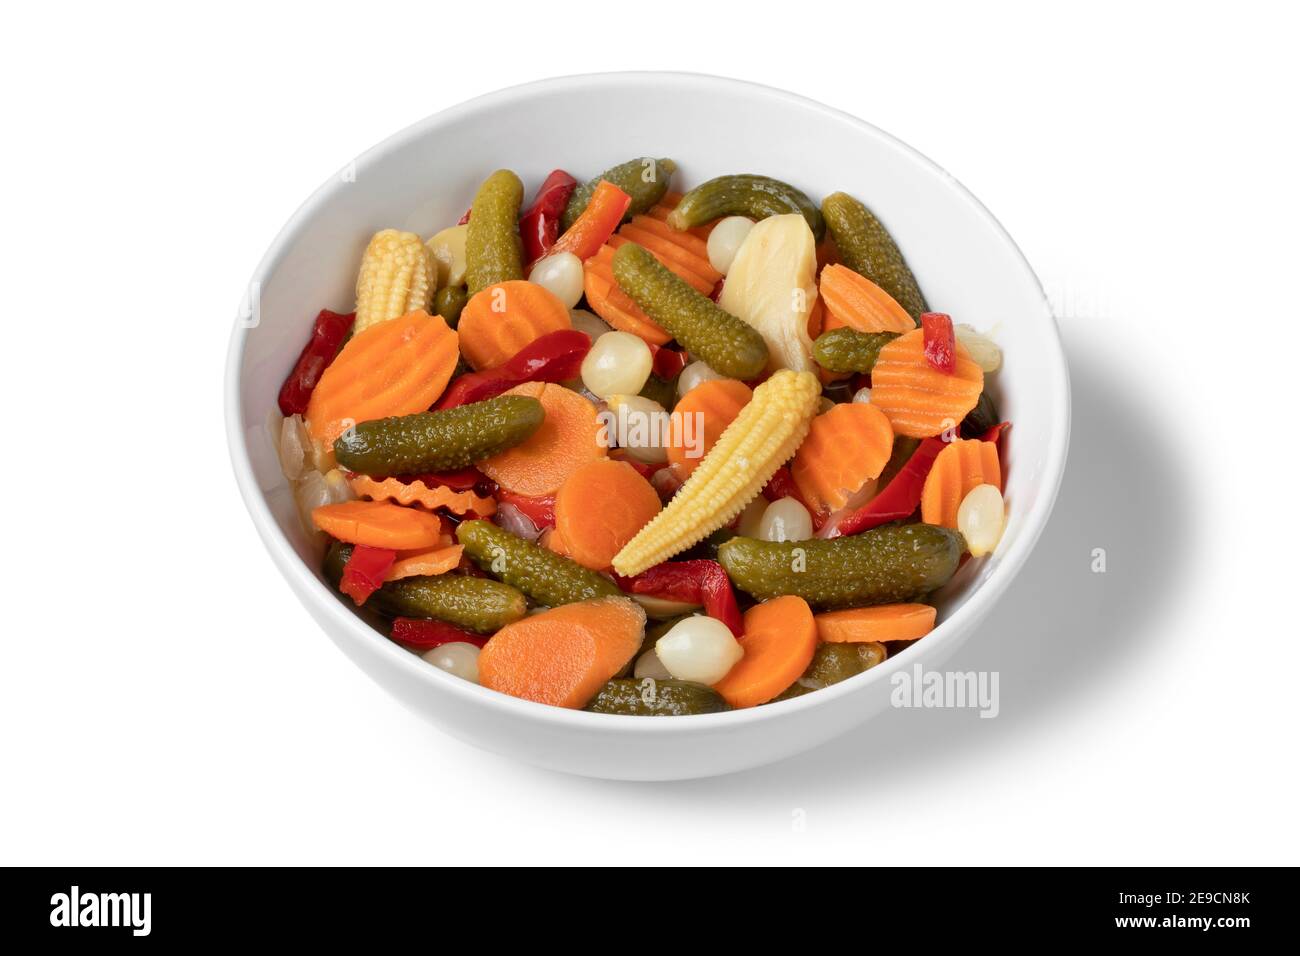 White bowl with colorful homemade pickled vegetable mix close up as a side dish isolated on white background Stock Photo